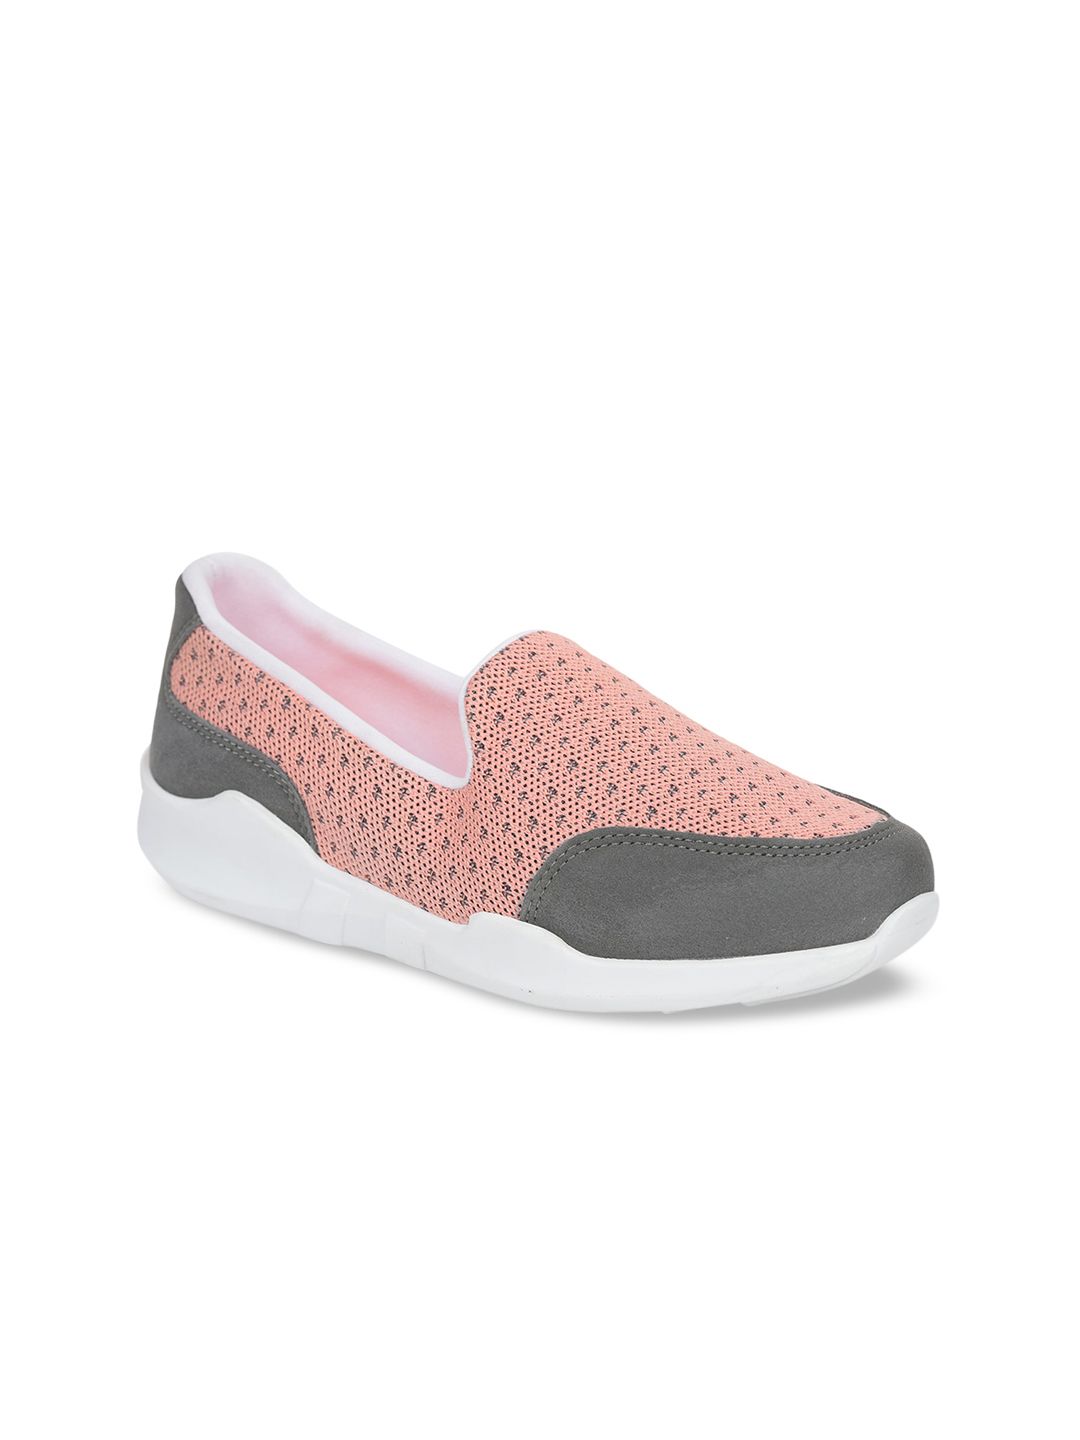 Liberty Women Peach-Coloured Woven Design Slip-On Sneakers Price in India